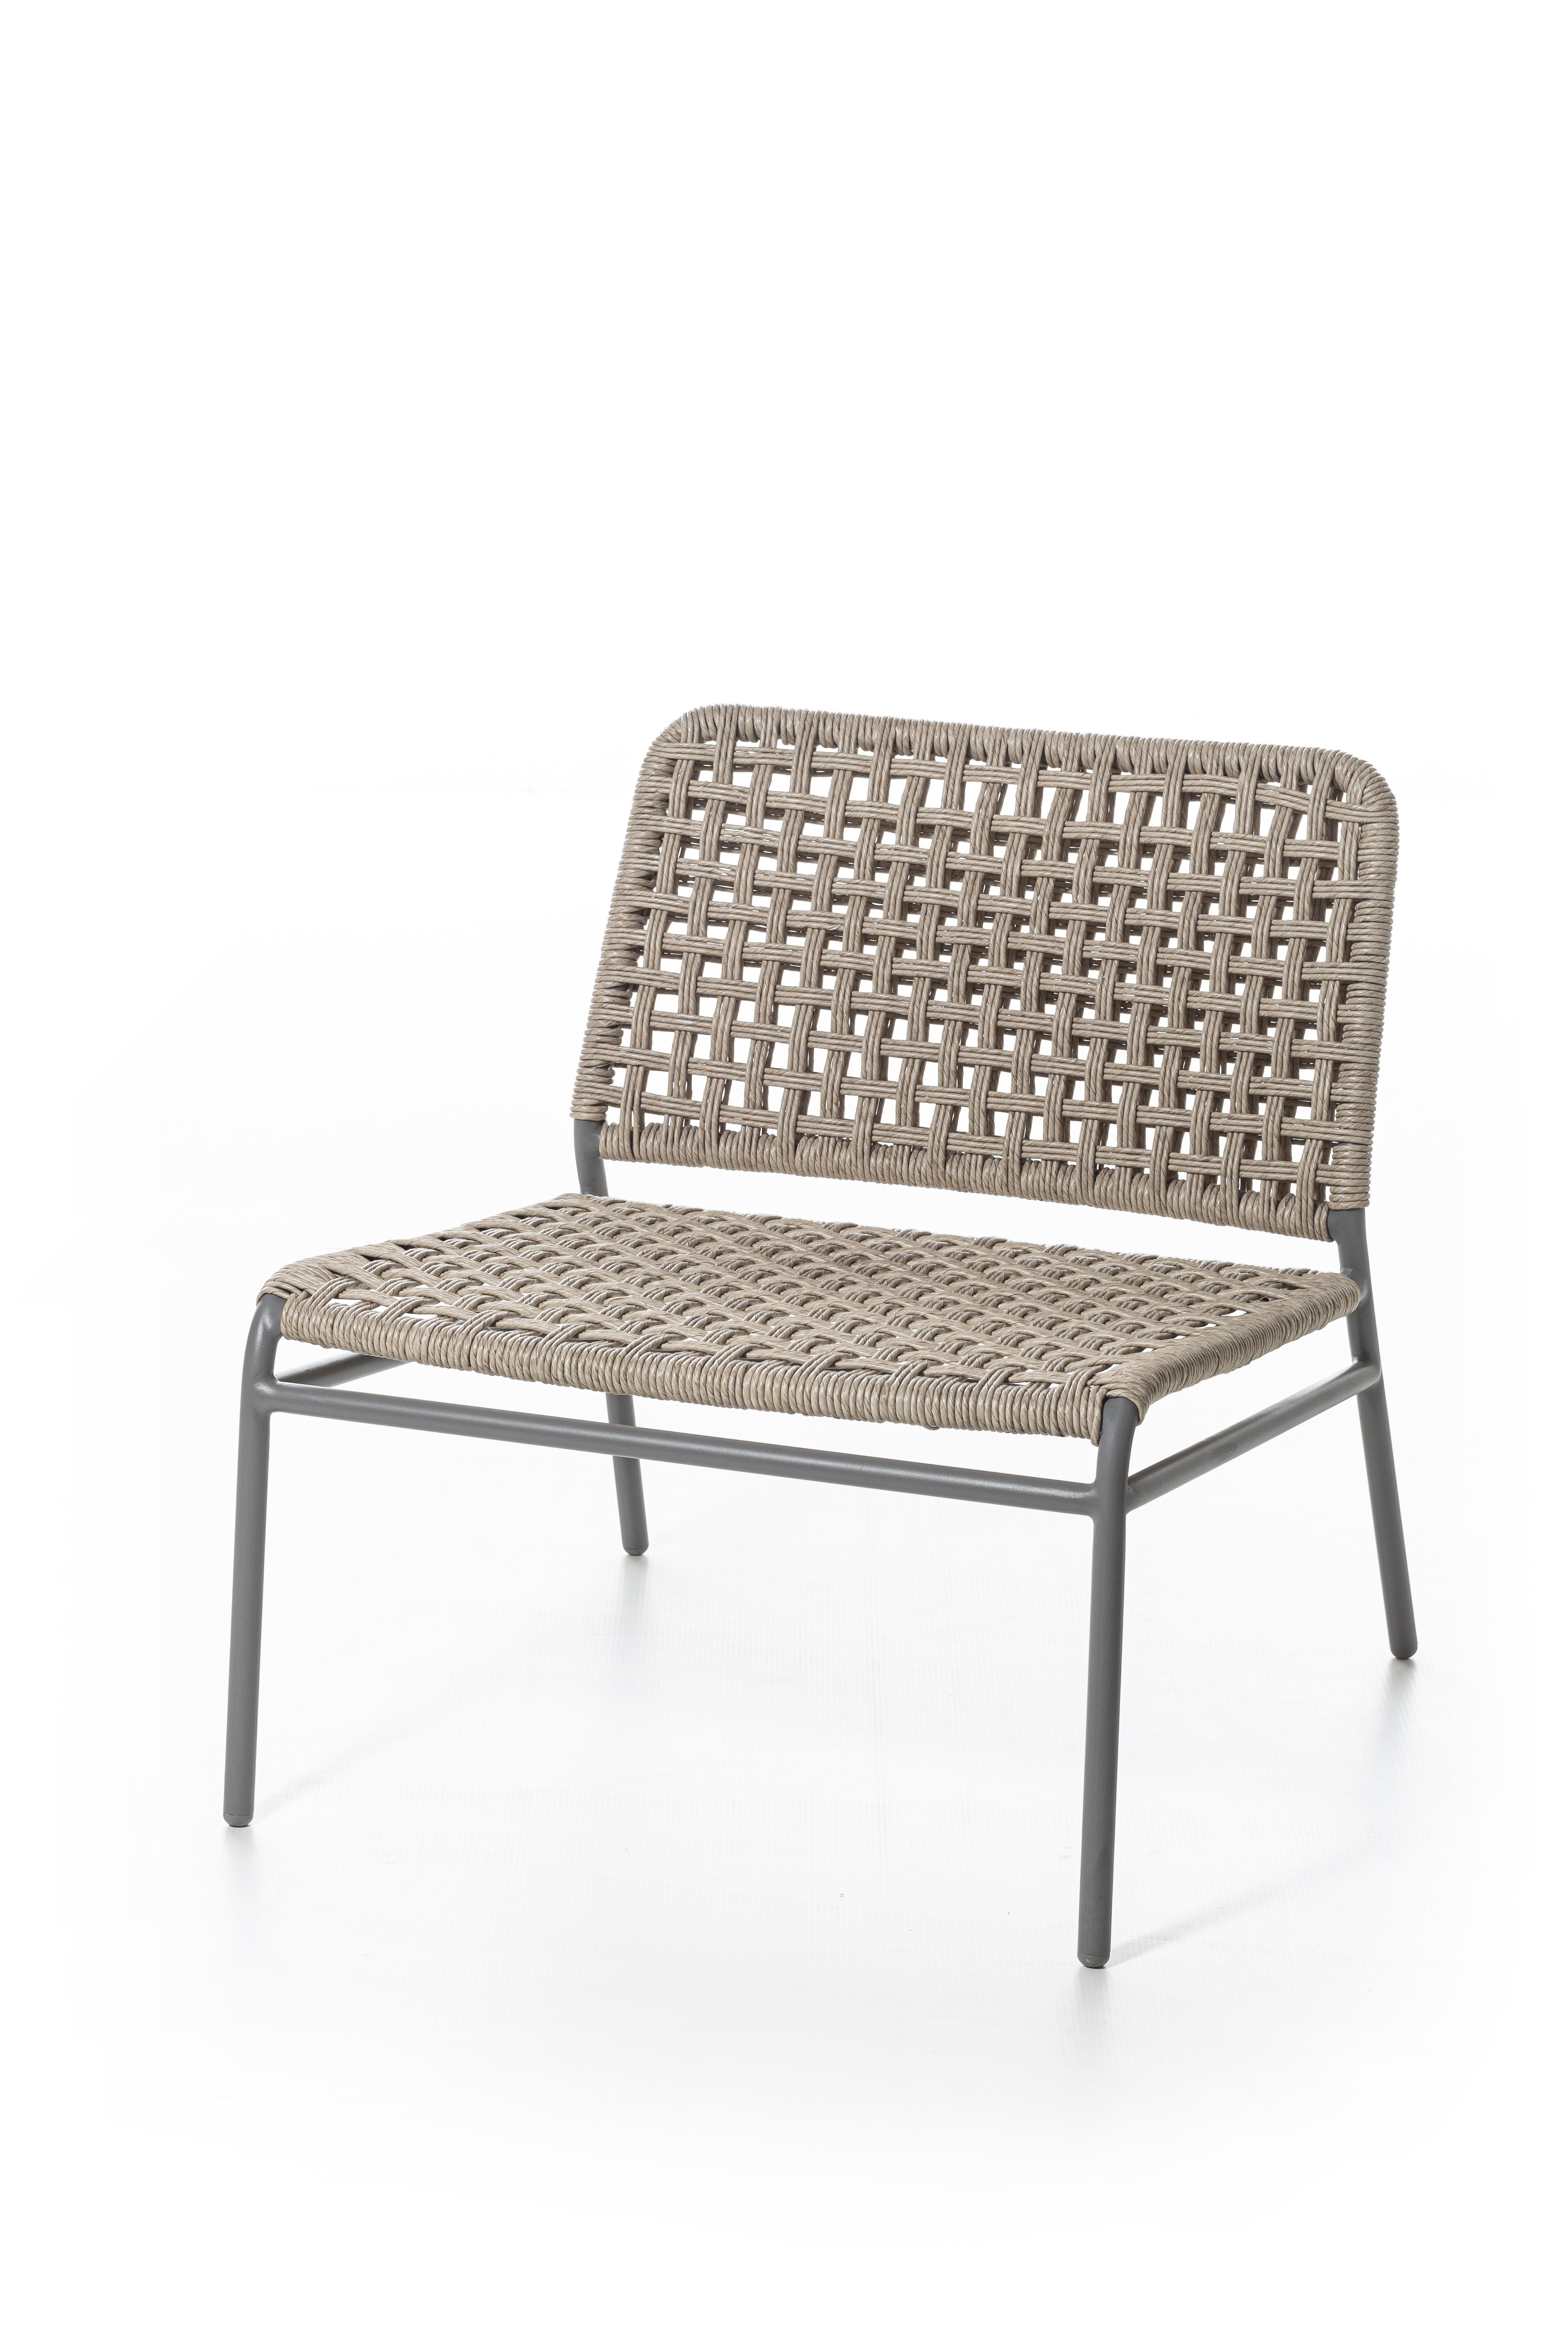 Simple and refined, the Straw 25 lounge chair is characterised by the structure in tubular aluminium painted light grey. A slender and light product covered with a handwoven weave with a double torsion polyethylene rope, a fibre with a natural,